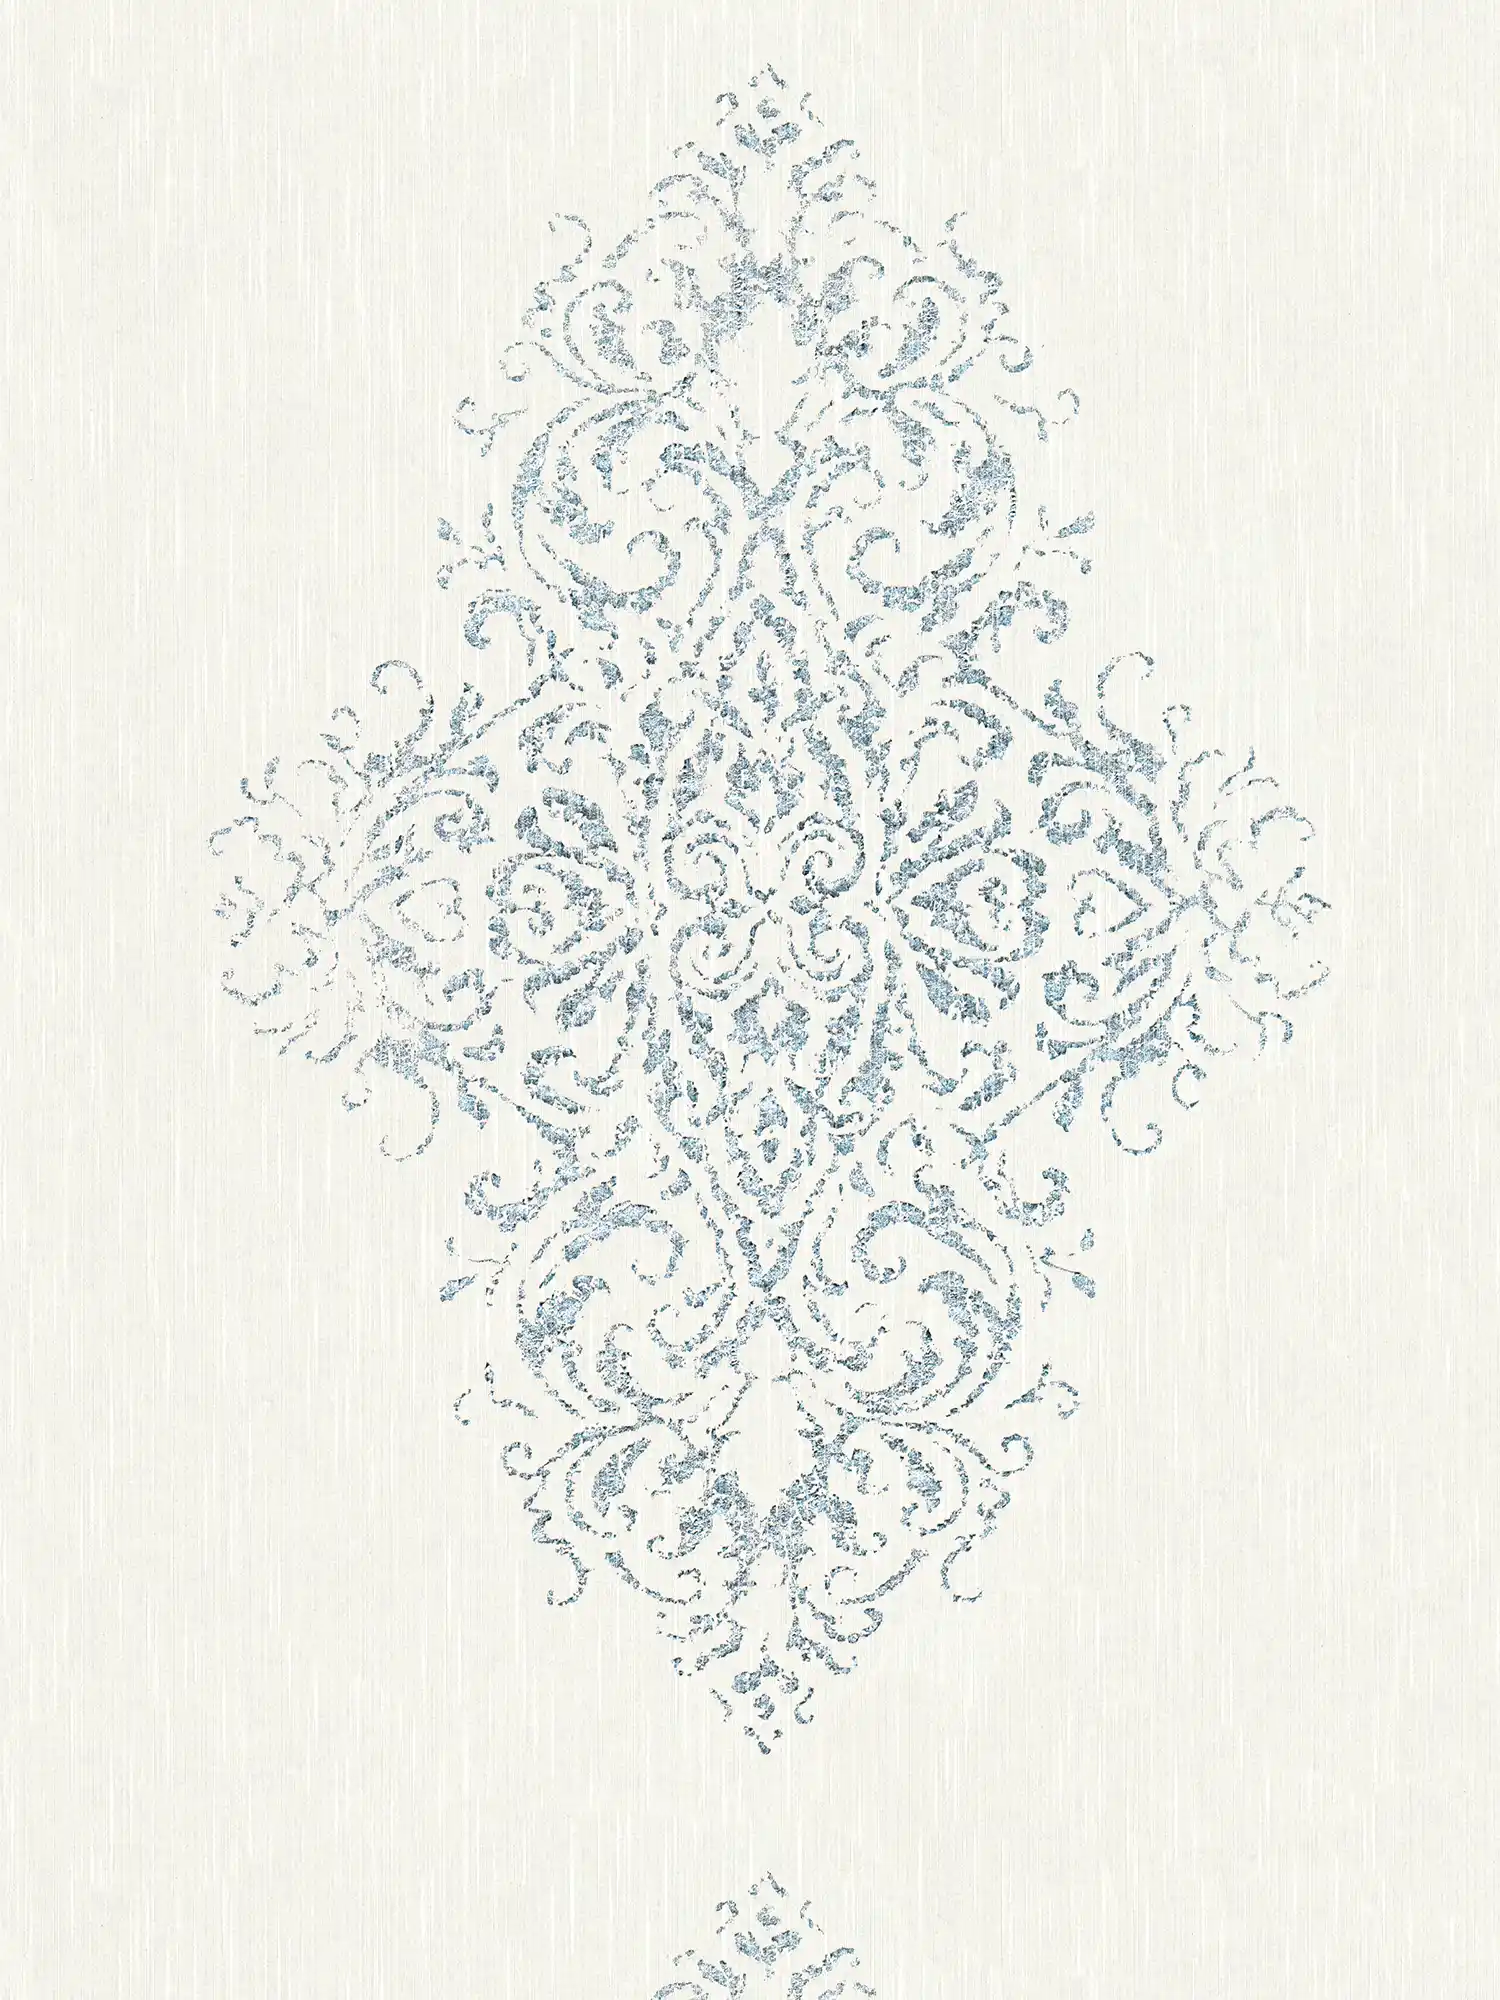 Ornament wallpaper with metallic effect in used look - white, silver, blue
